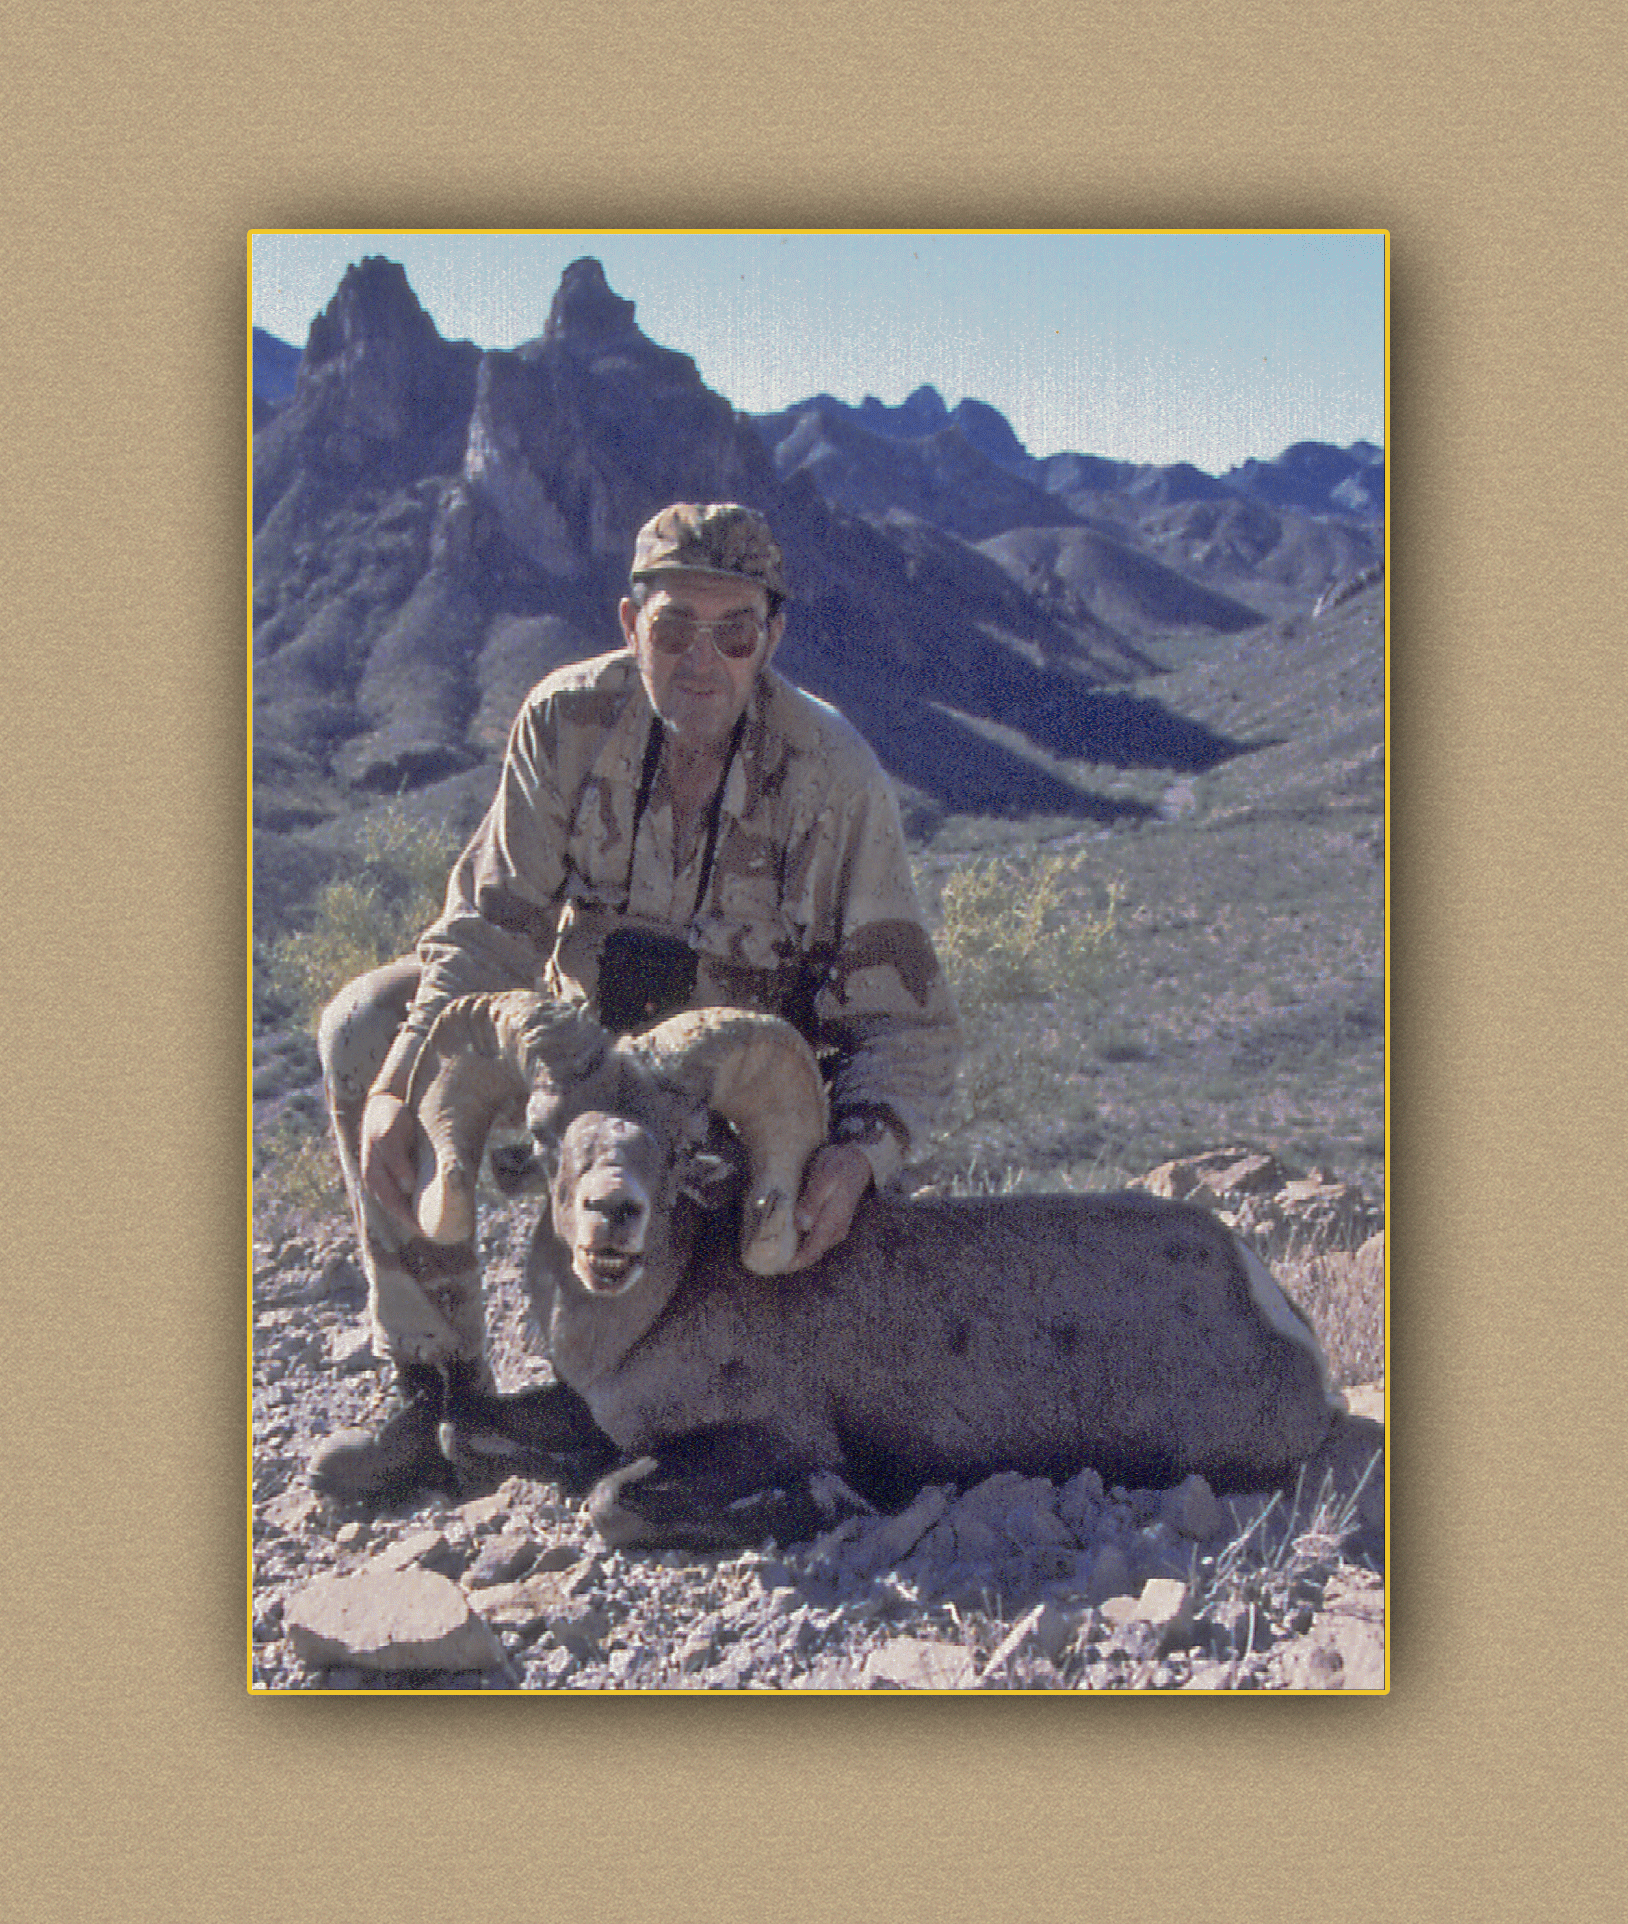 yellowhorn outfitters arizonahunting yellowhorn outfitters bighorn sheep outfitting guiding deer elk antelope photography